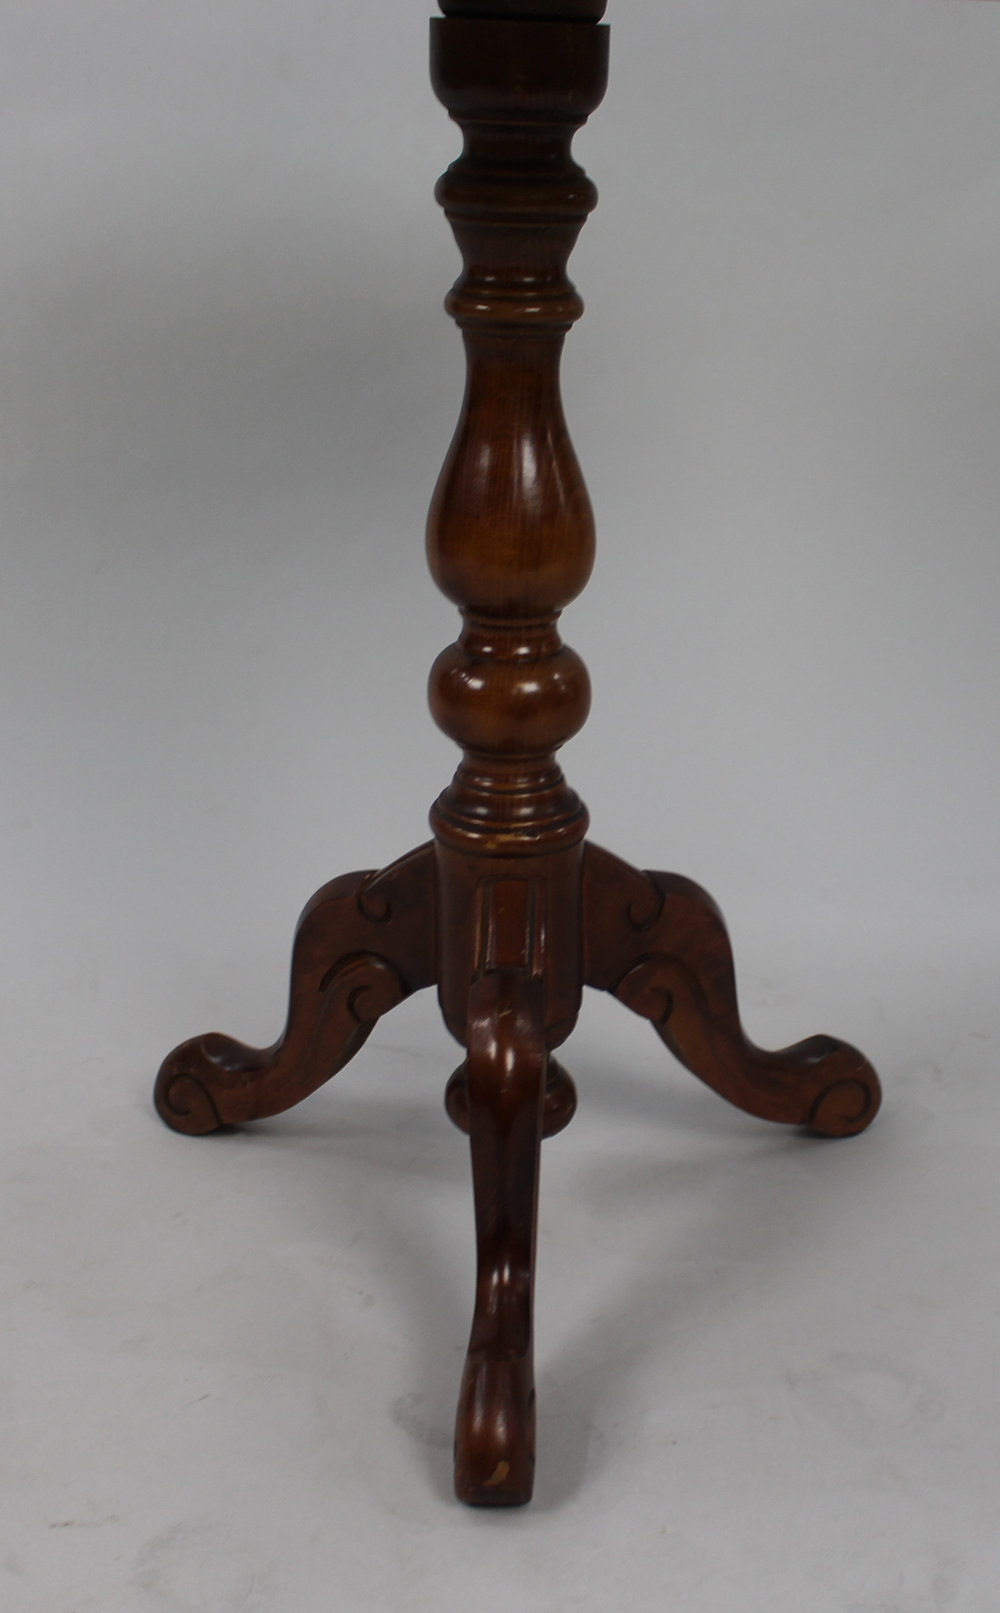 Vintage Tripod Table with Simulated Onyx Top - Image 4 of 4